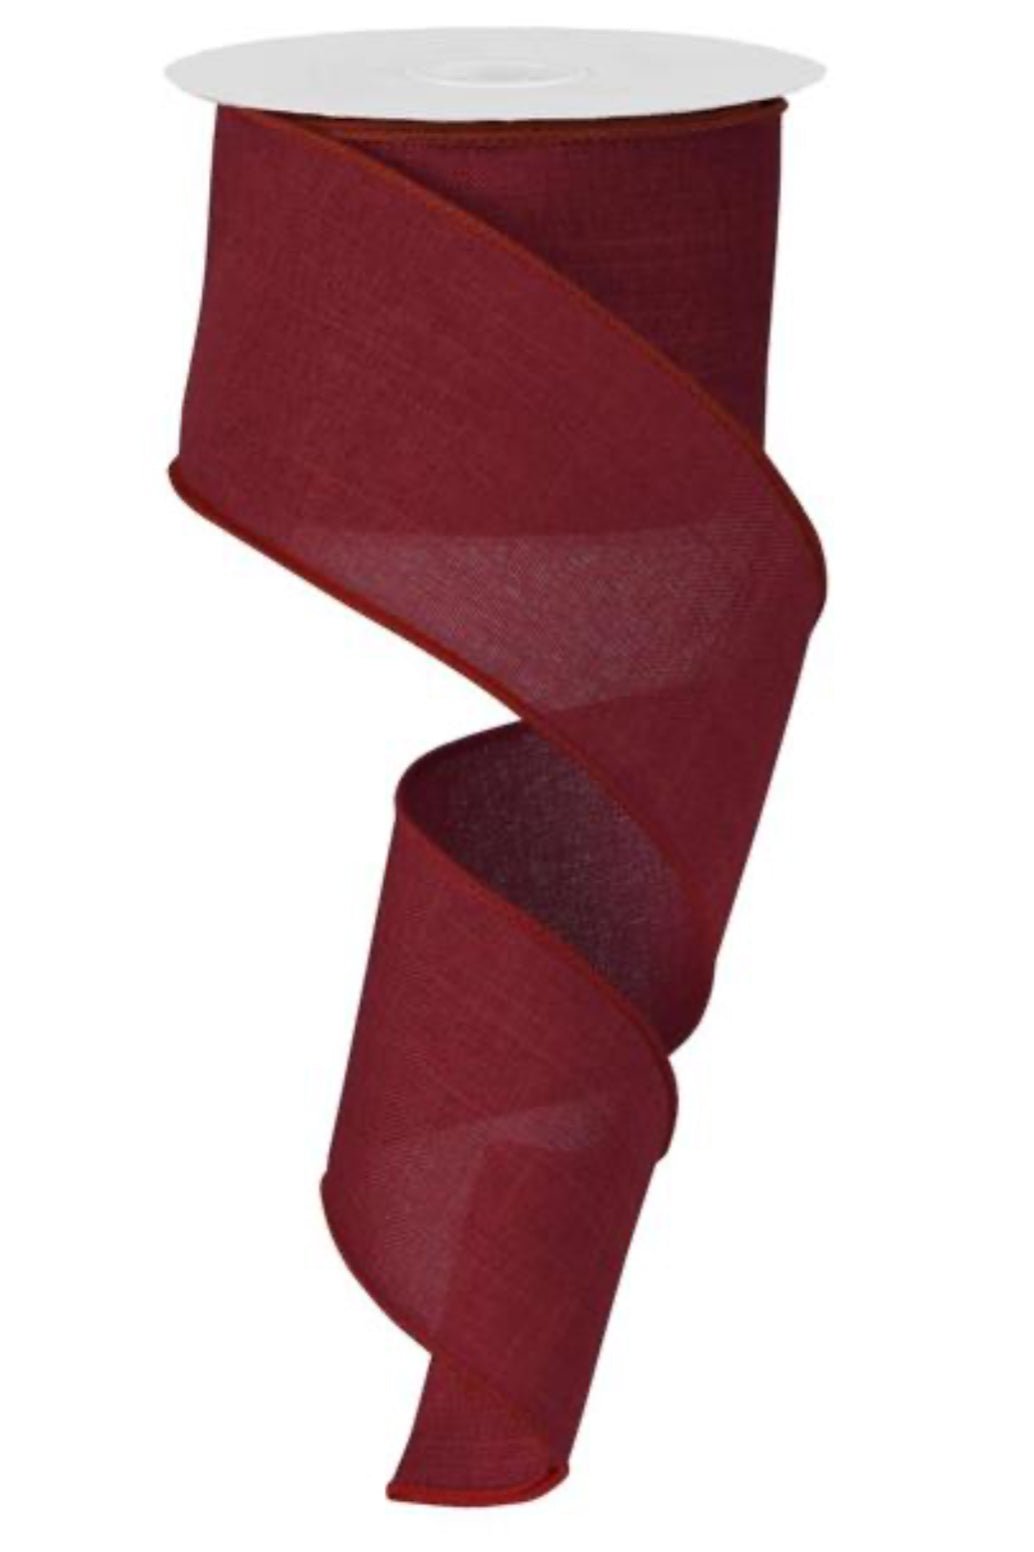 Burgundy solid wired ribbon on linen fabric 2.5” - Greenery MarketRG127905